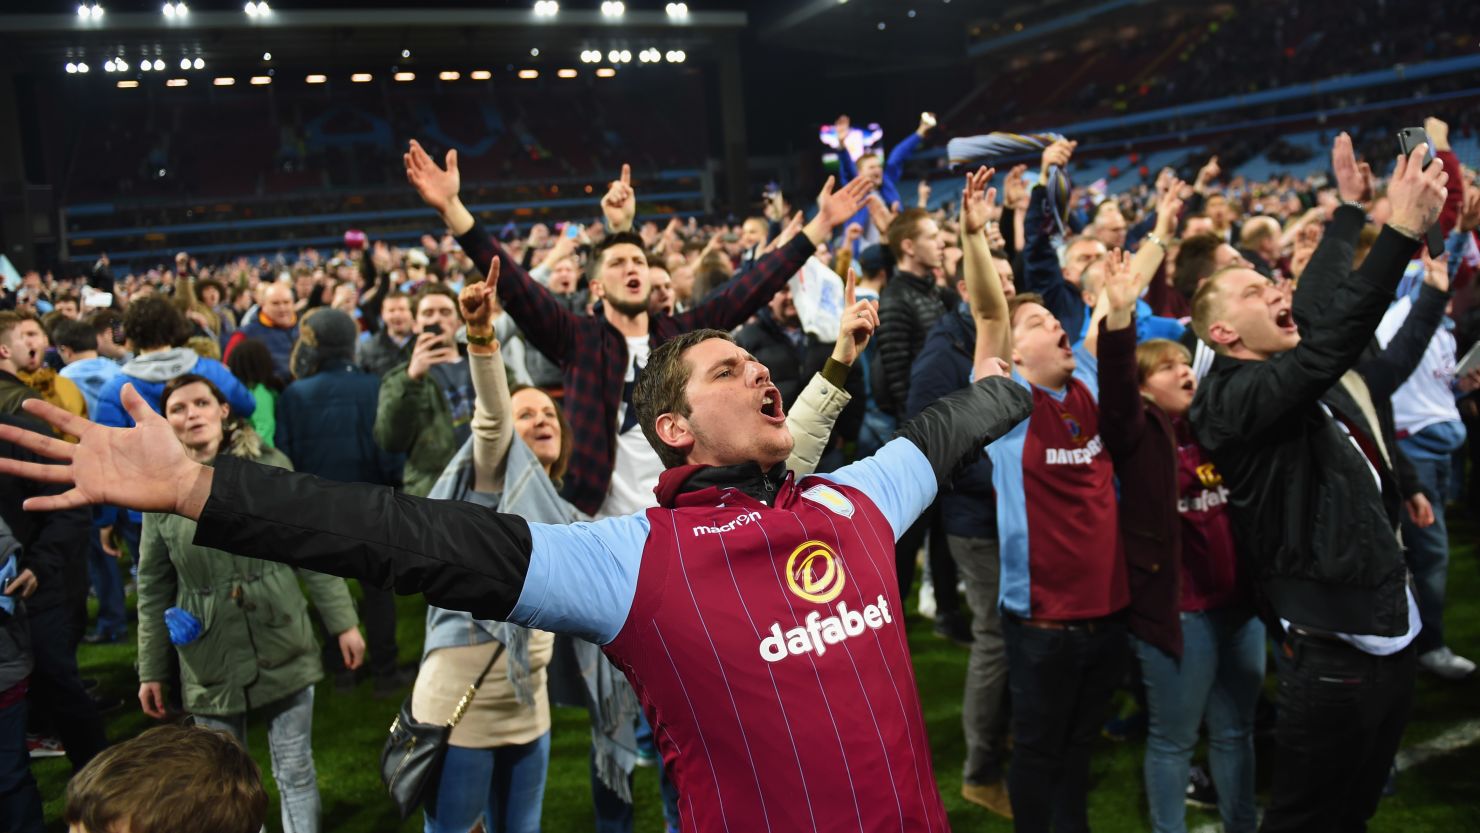 Aston Villa fans celebrate victory on the pitch after the FA Cup Quarter Final match between Aston Villa and West Bromwich Albion at Villa Park on March 7, 2015 in Birmingham, England